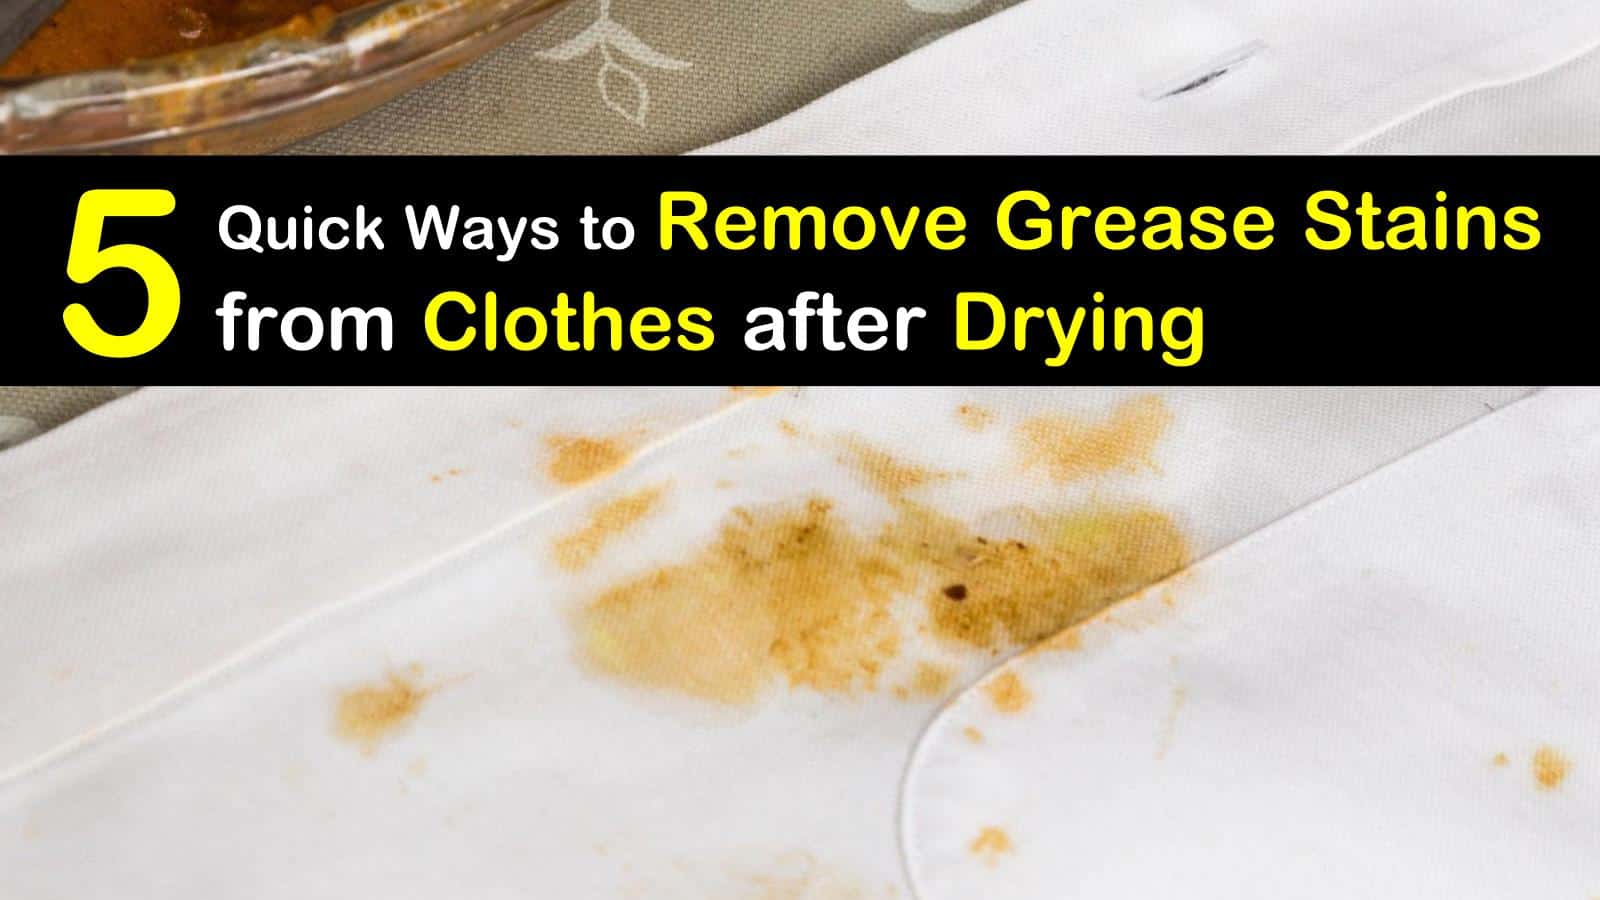 21 Quick Ways to Remove Grease Stains from Clothes after Drying